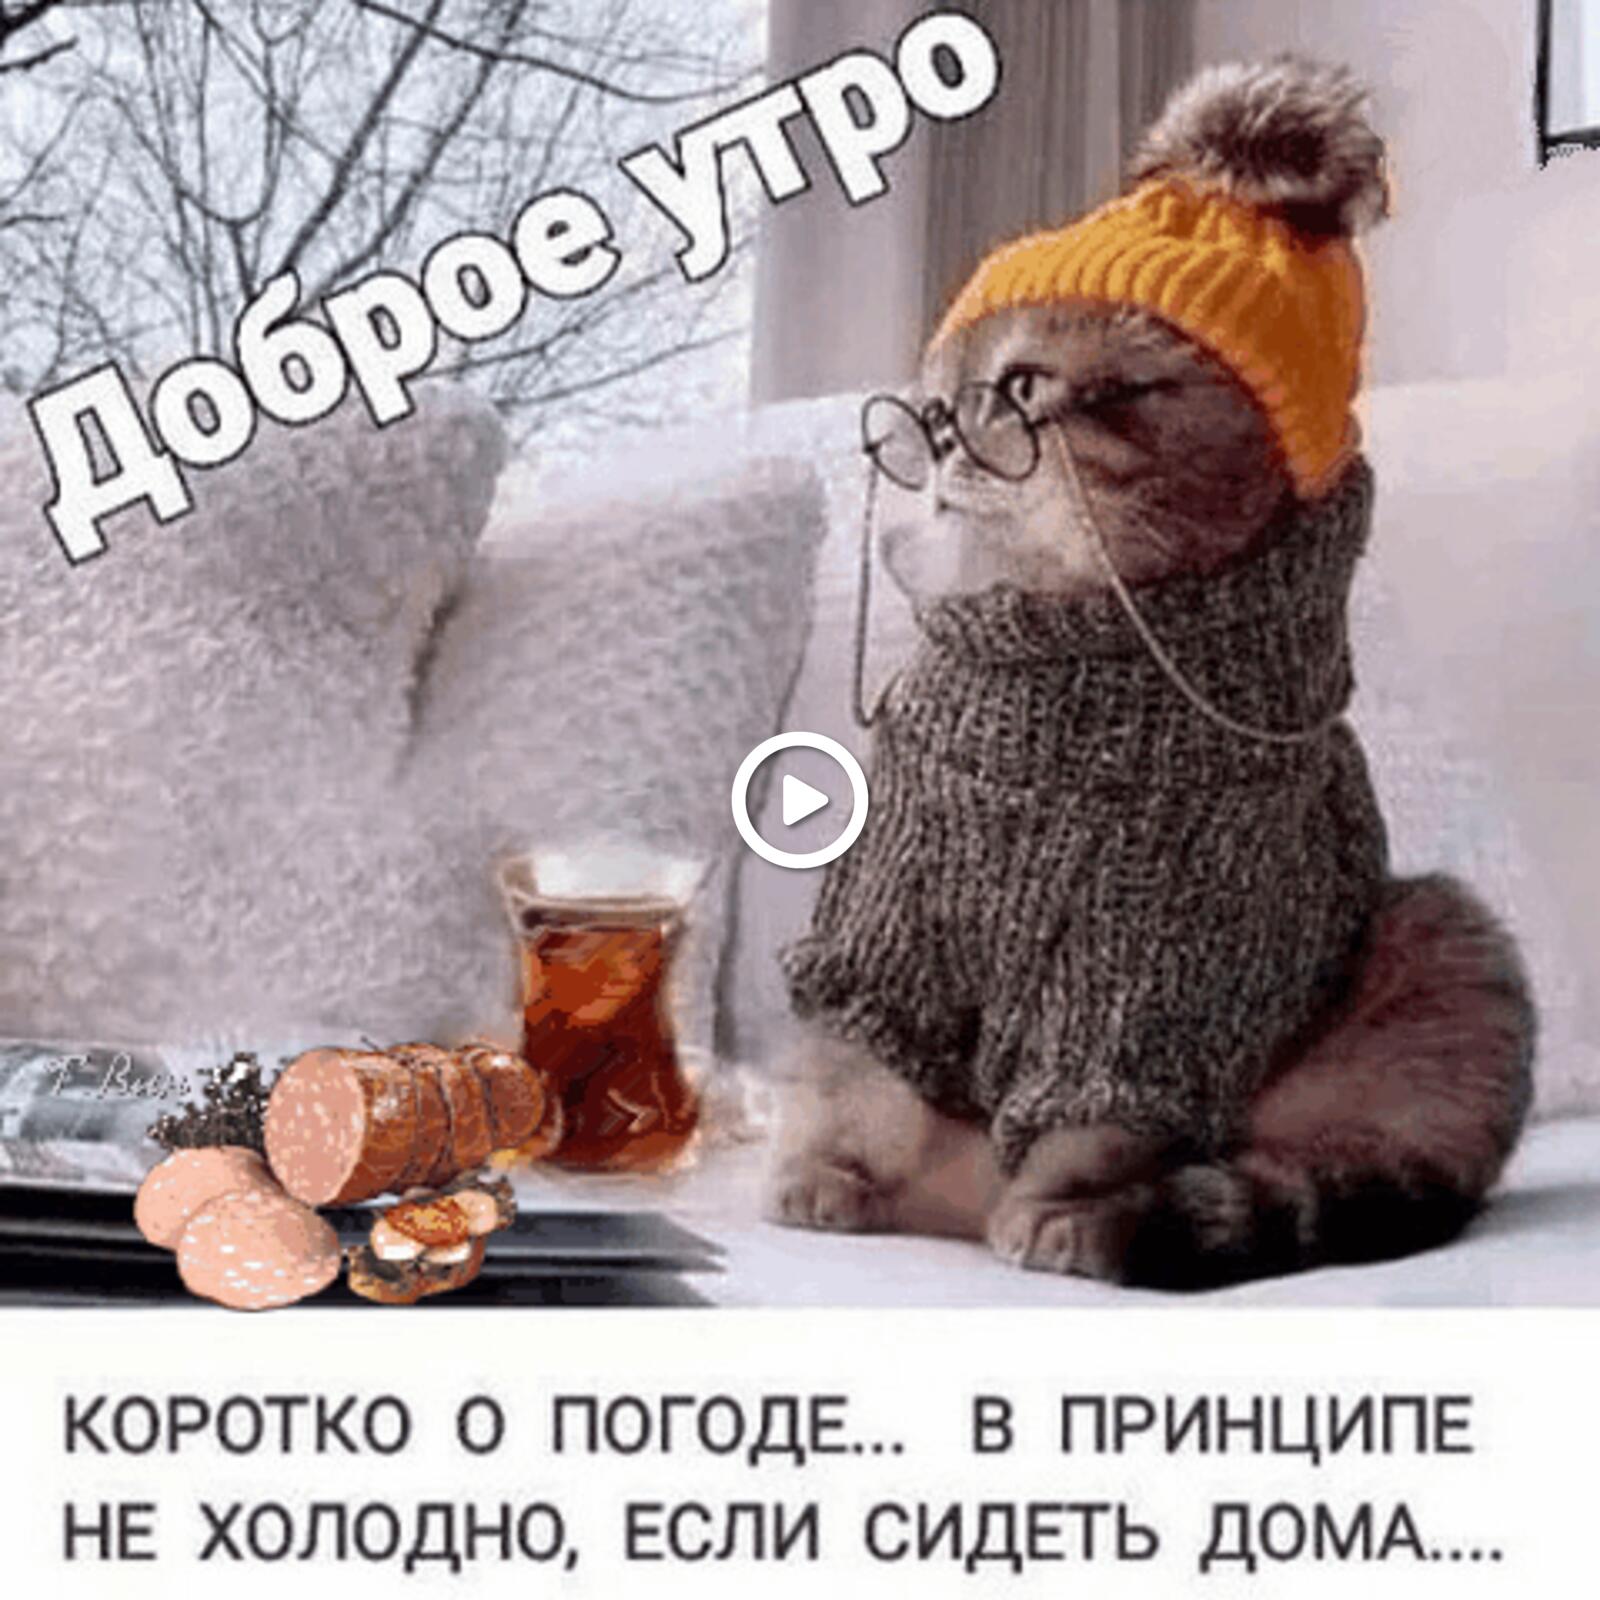 A postcard on the subject of winter morning good morning kitten for free